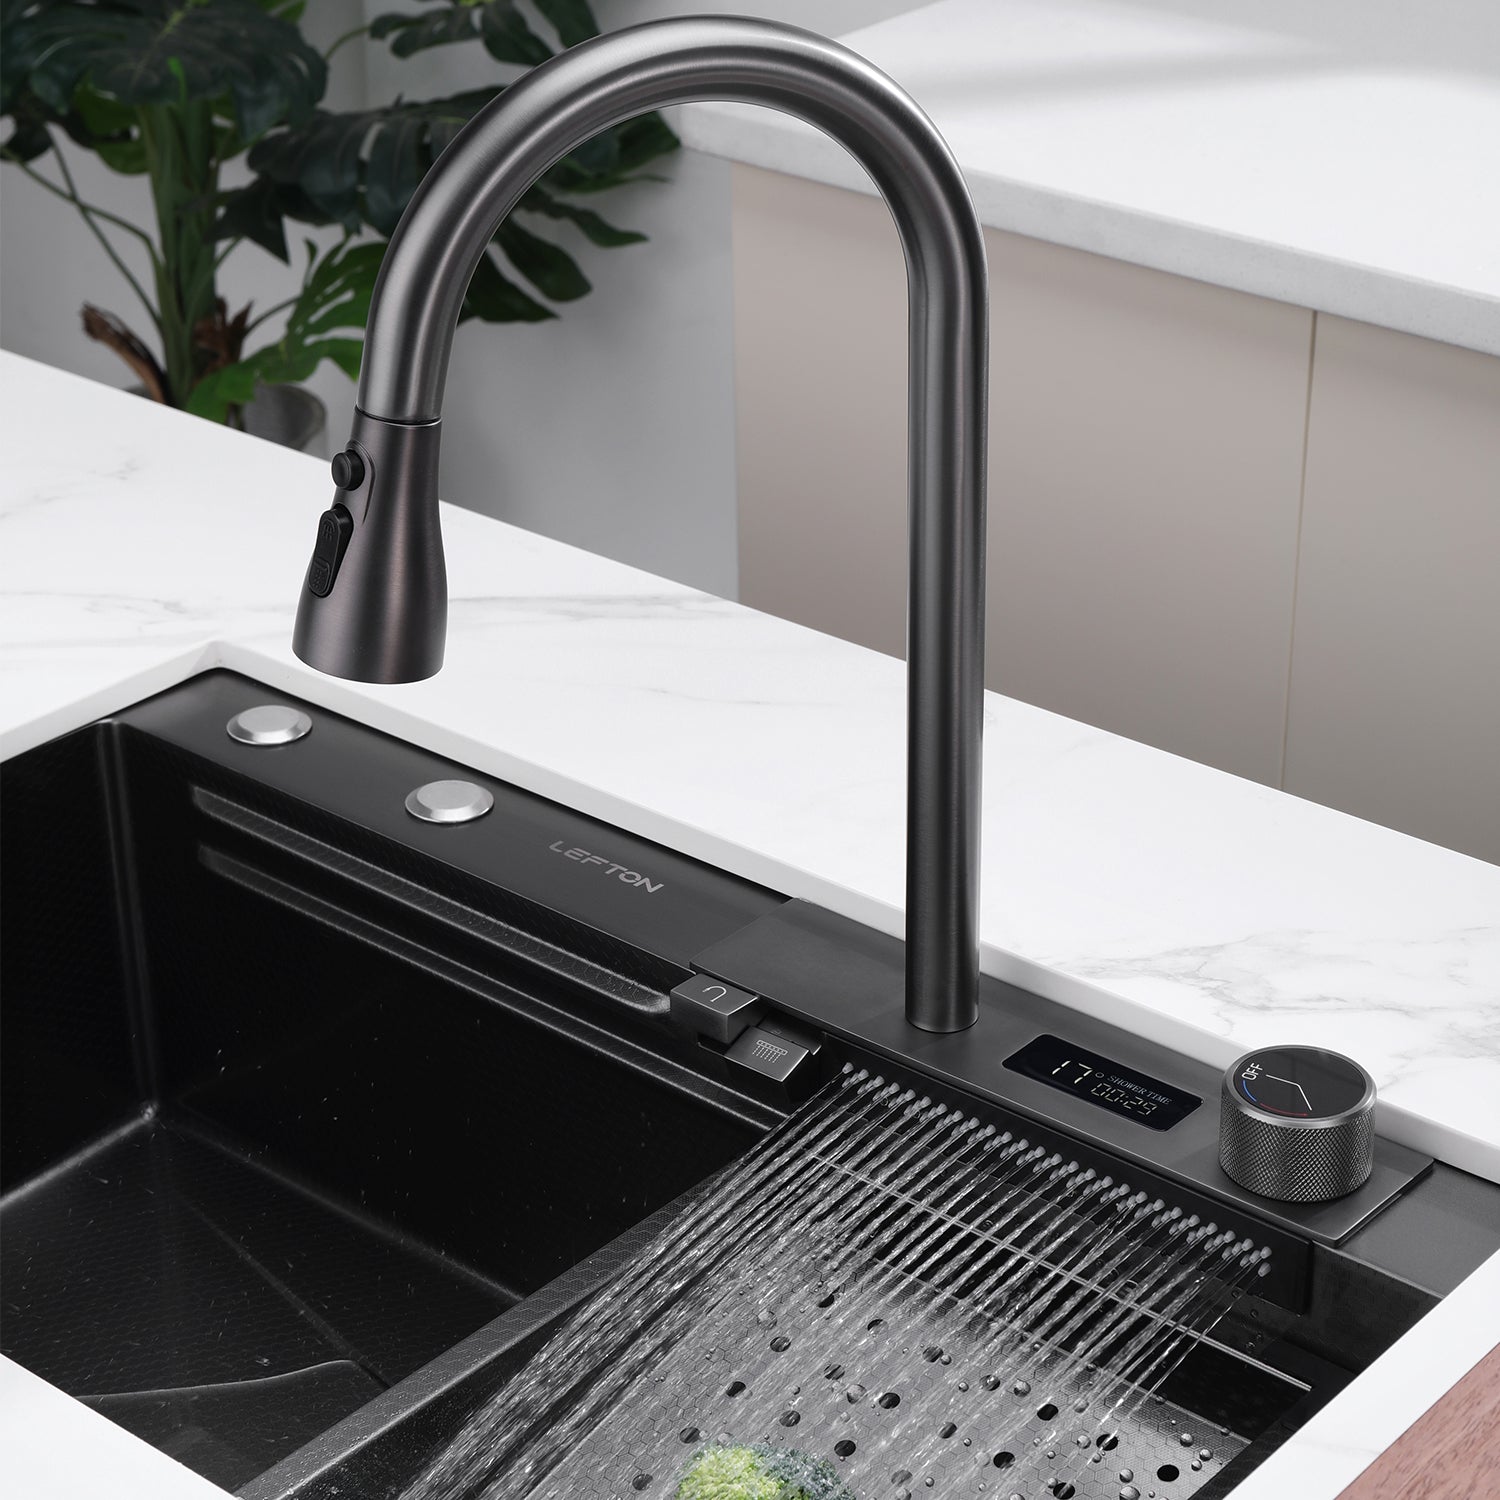 Lefton Single Bowl Workstation Kitchen Sink Set With Digital Temperature Display Waterfall Faucet